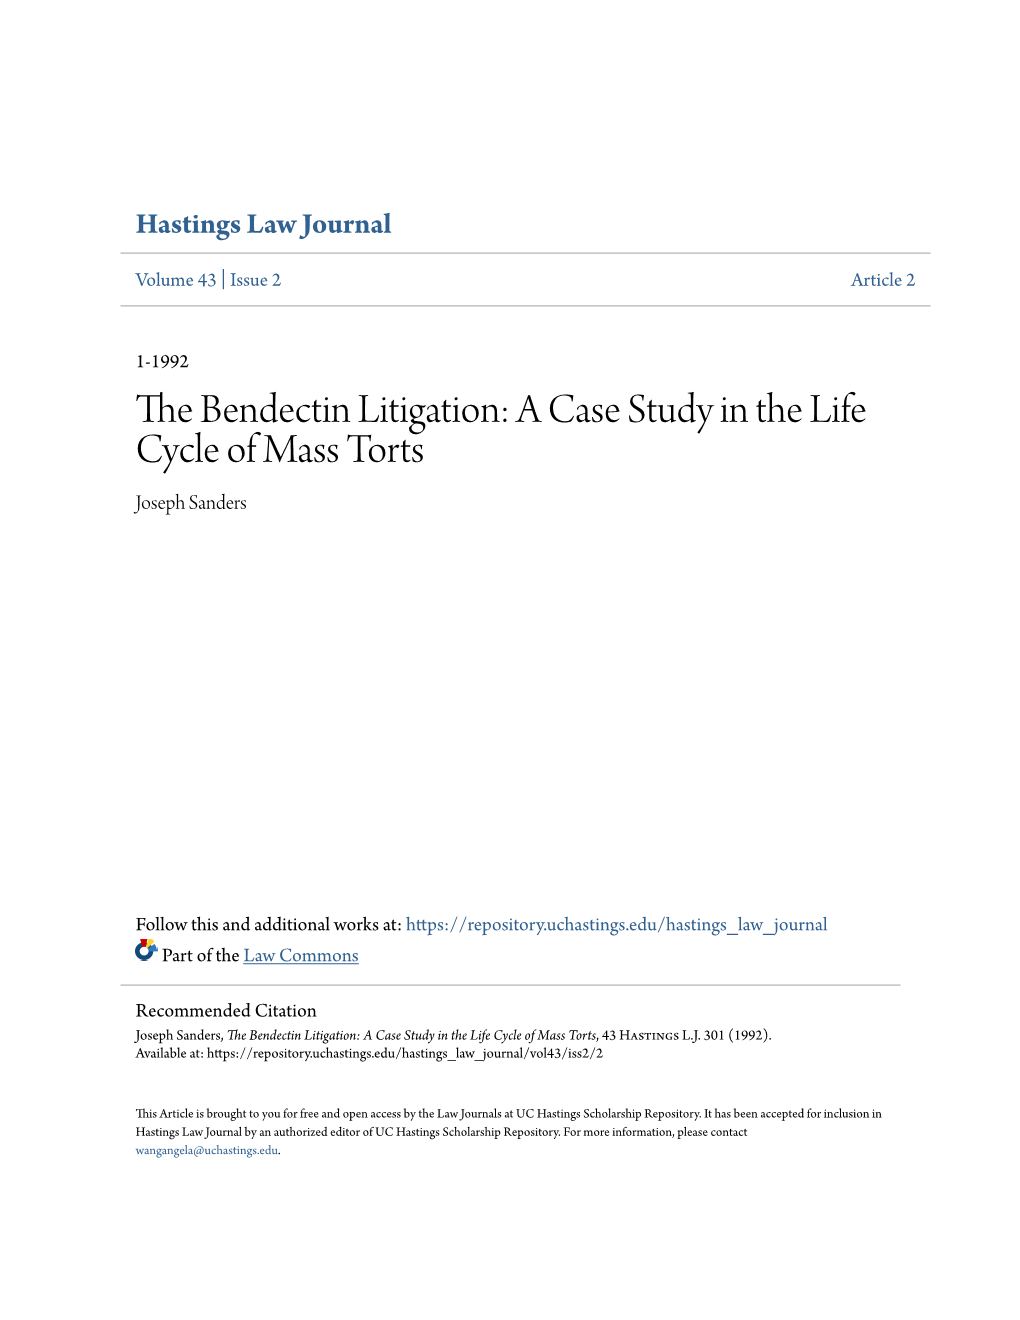 The Bendectin Litigation: a Case Study in the Life Cycle of Mass Torts Joseph Sanders